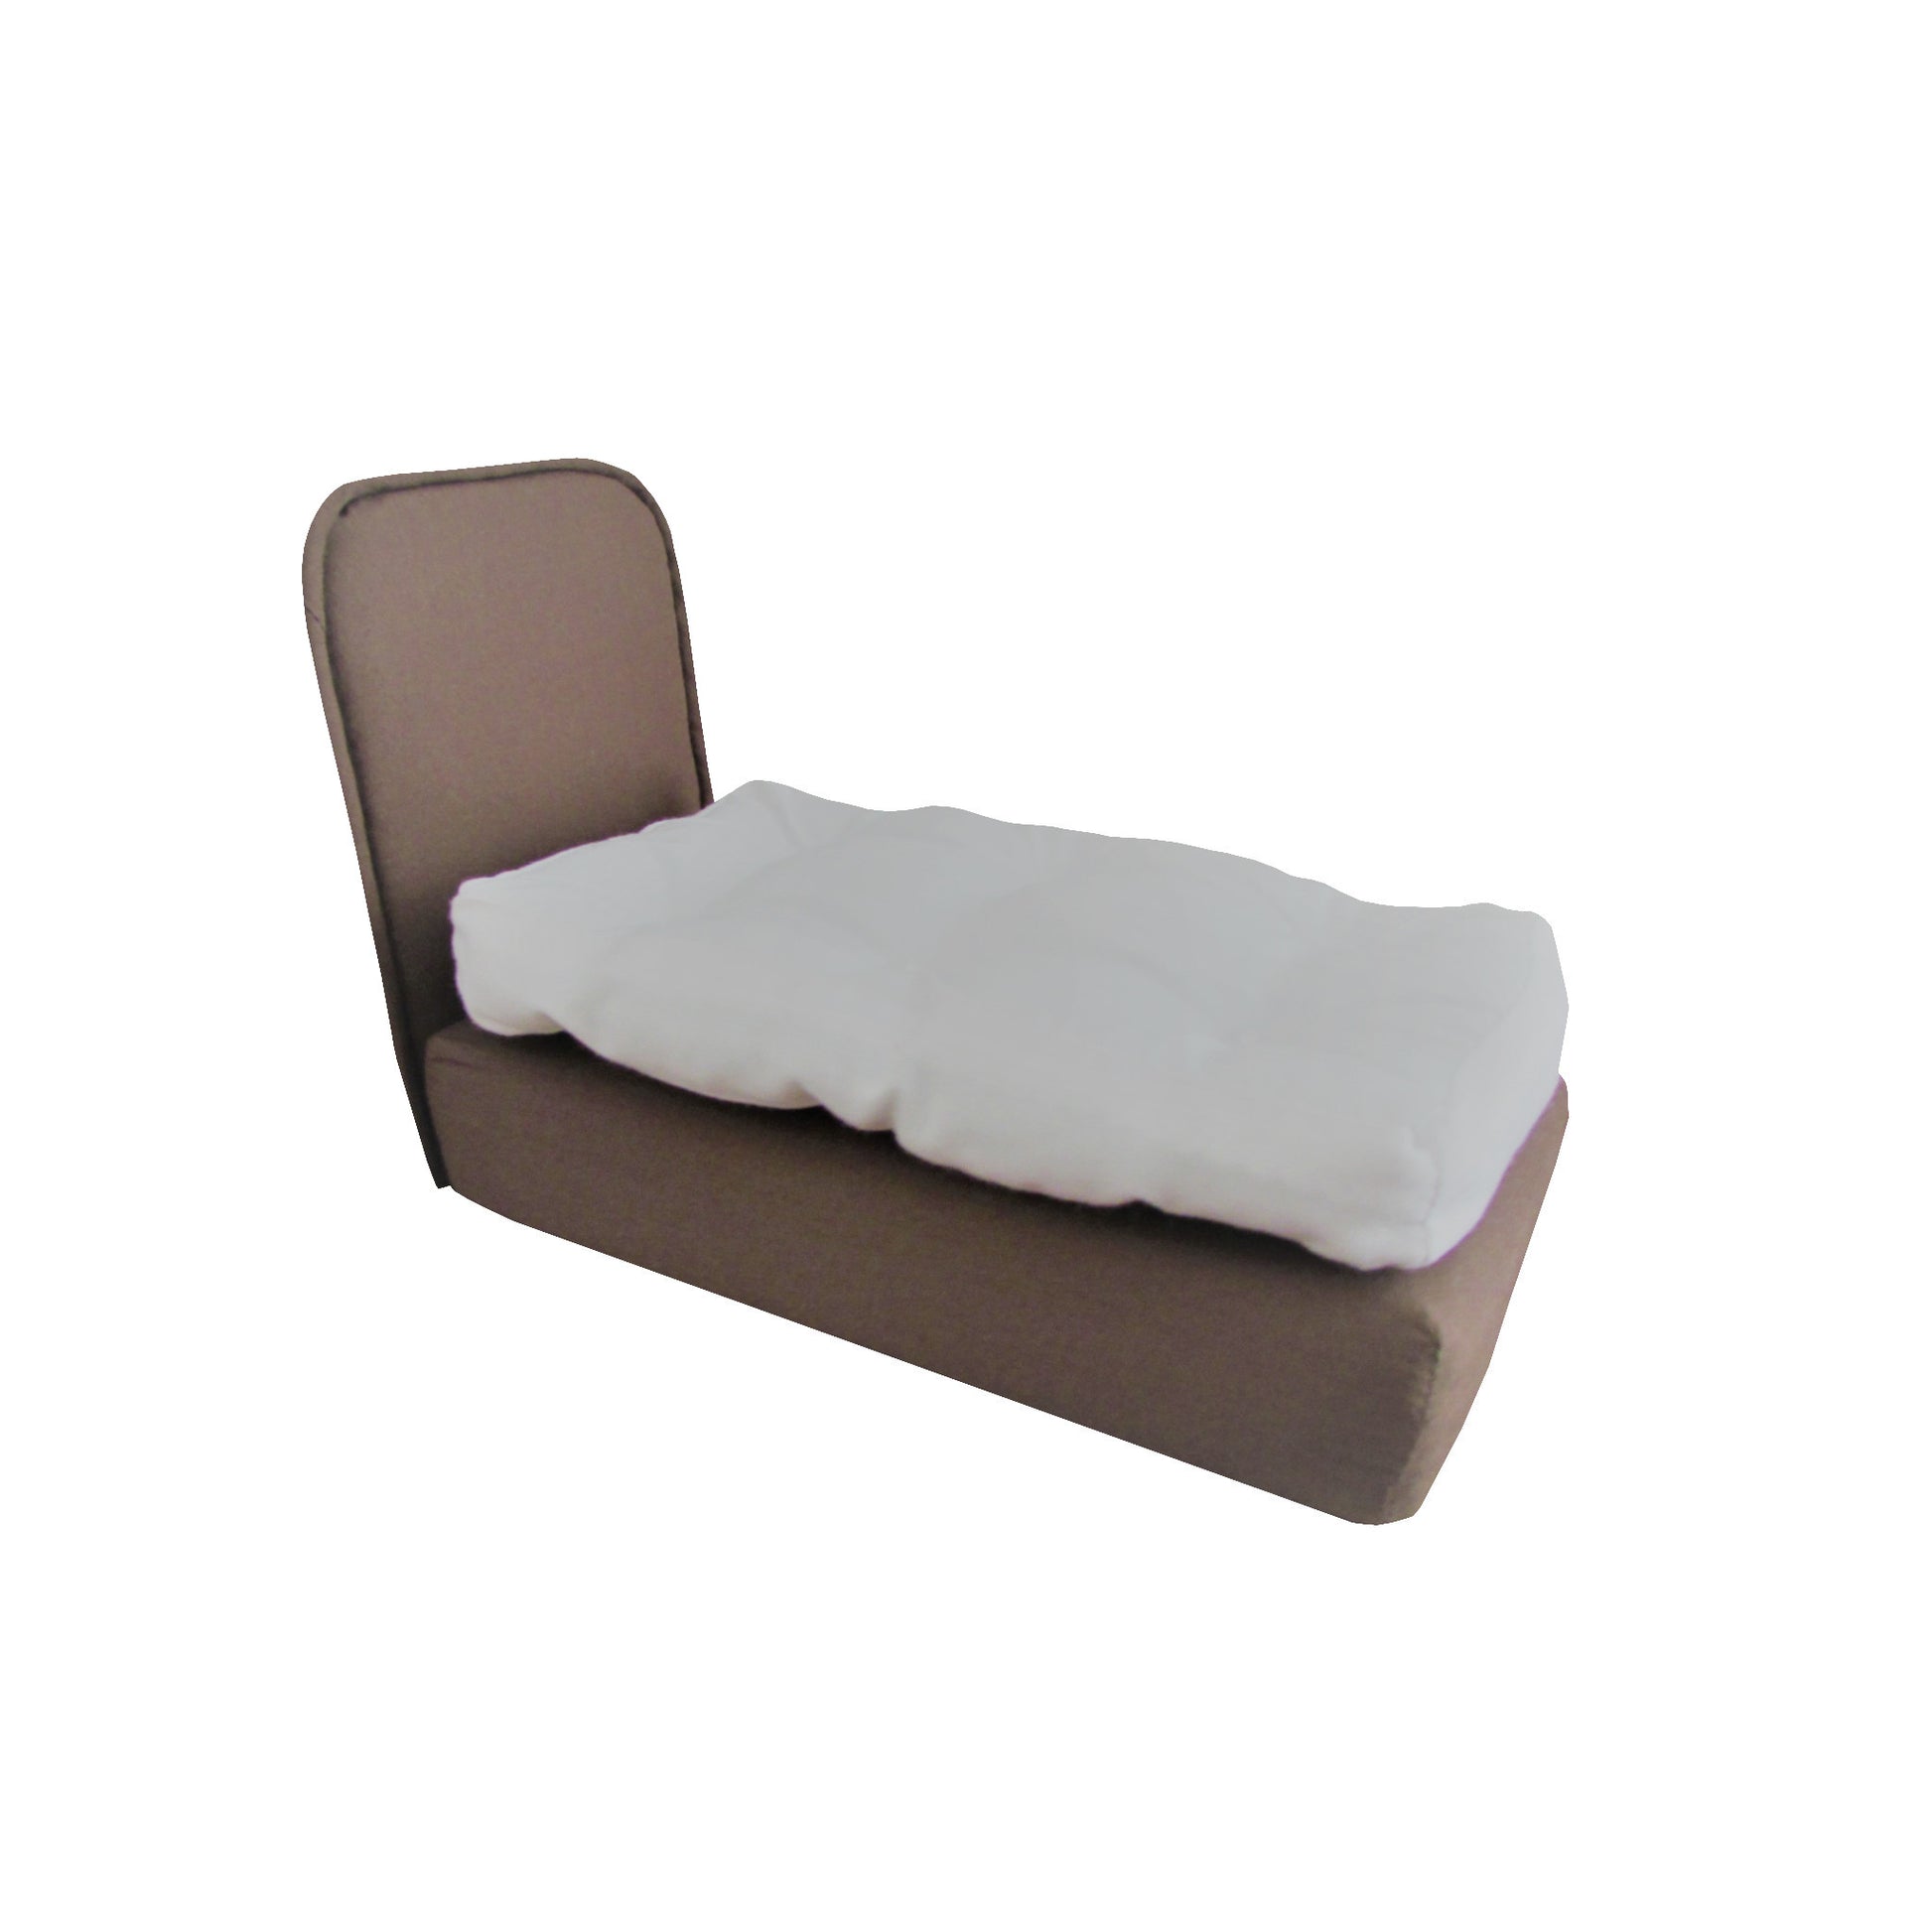 Upholstered Brown Doll Bed for 6.5-inch dolls